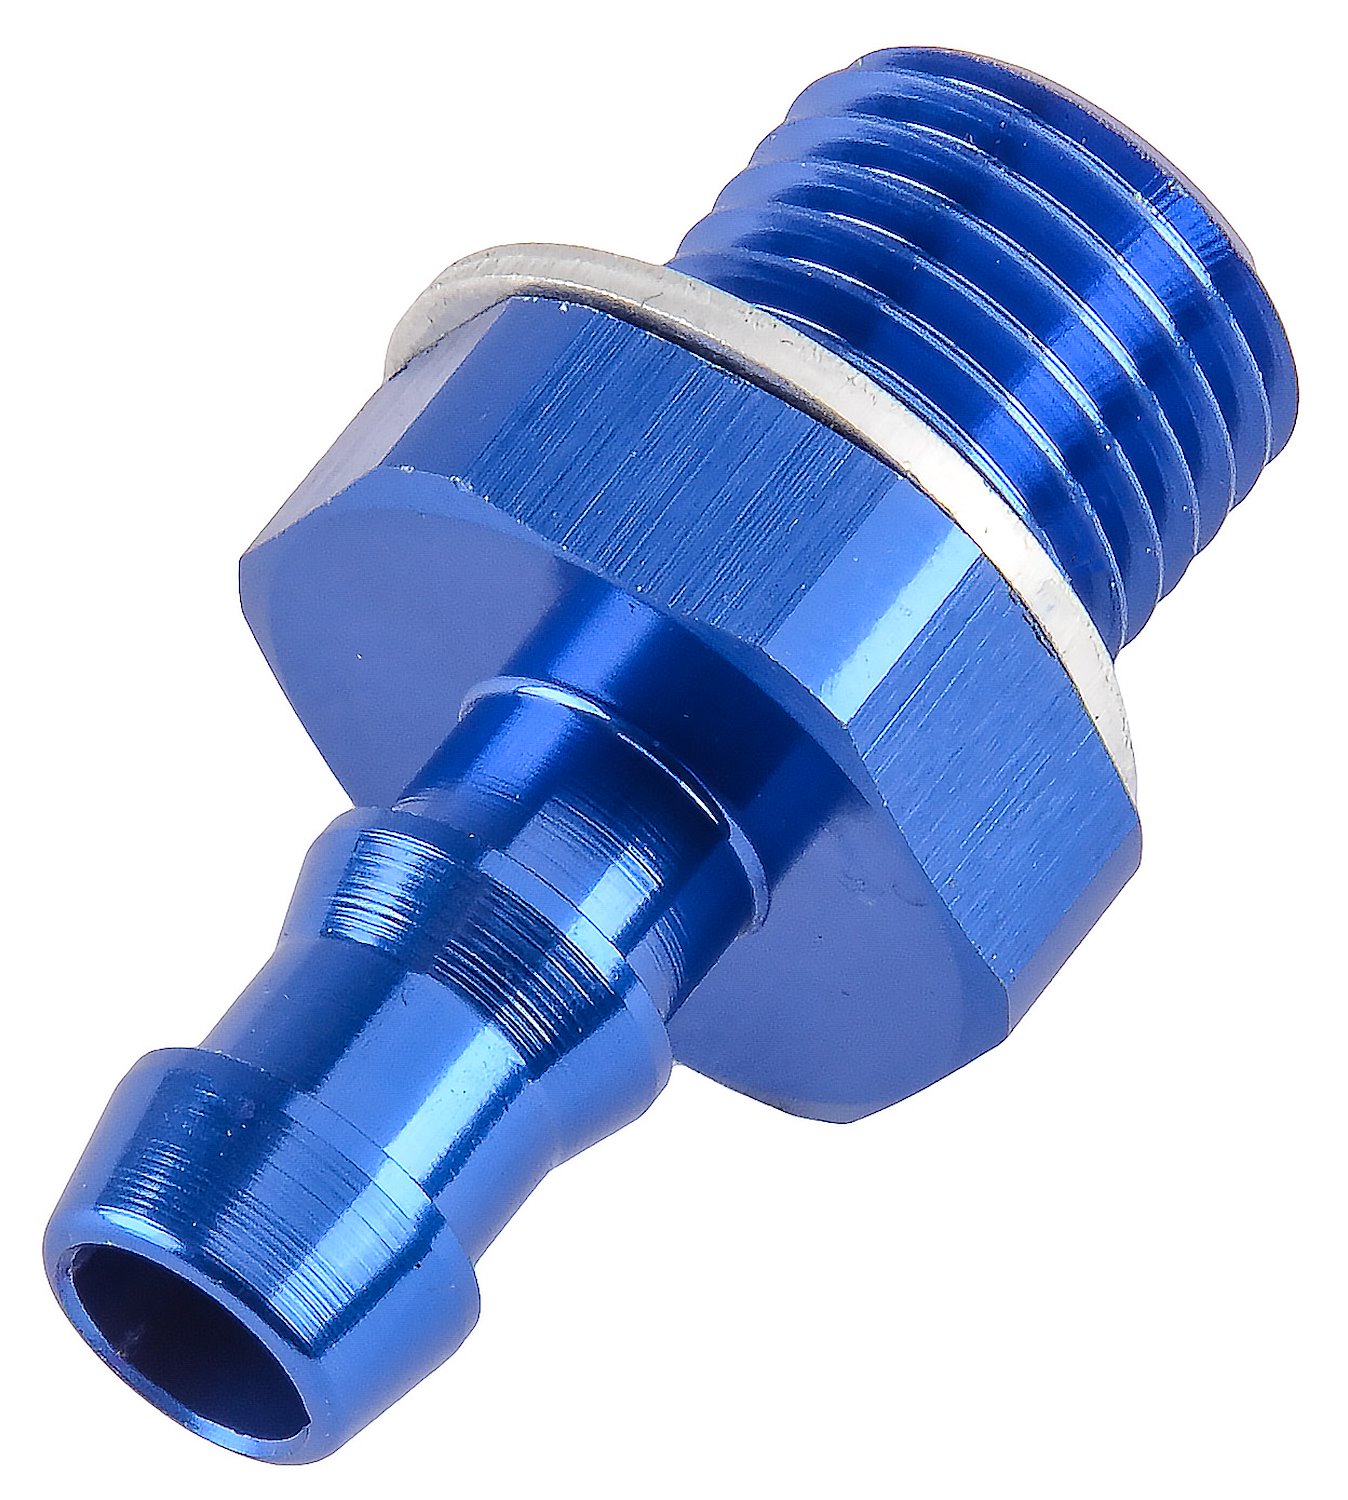 Hose Barb Adapter 14mm x 1.5 Male Straight to 5/16" Hose